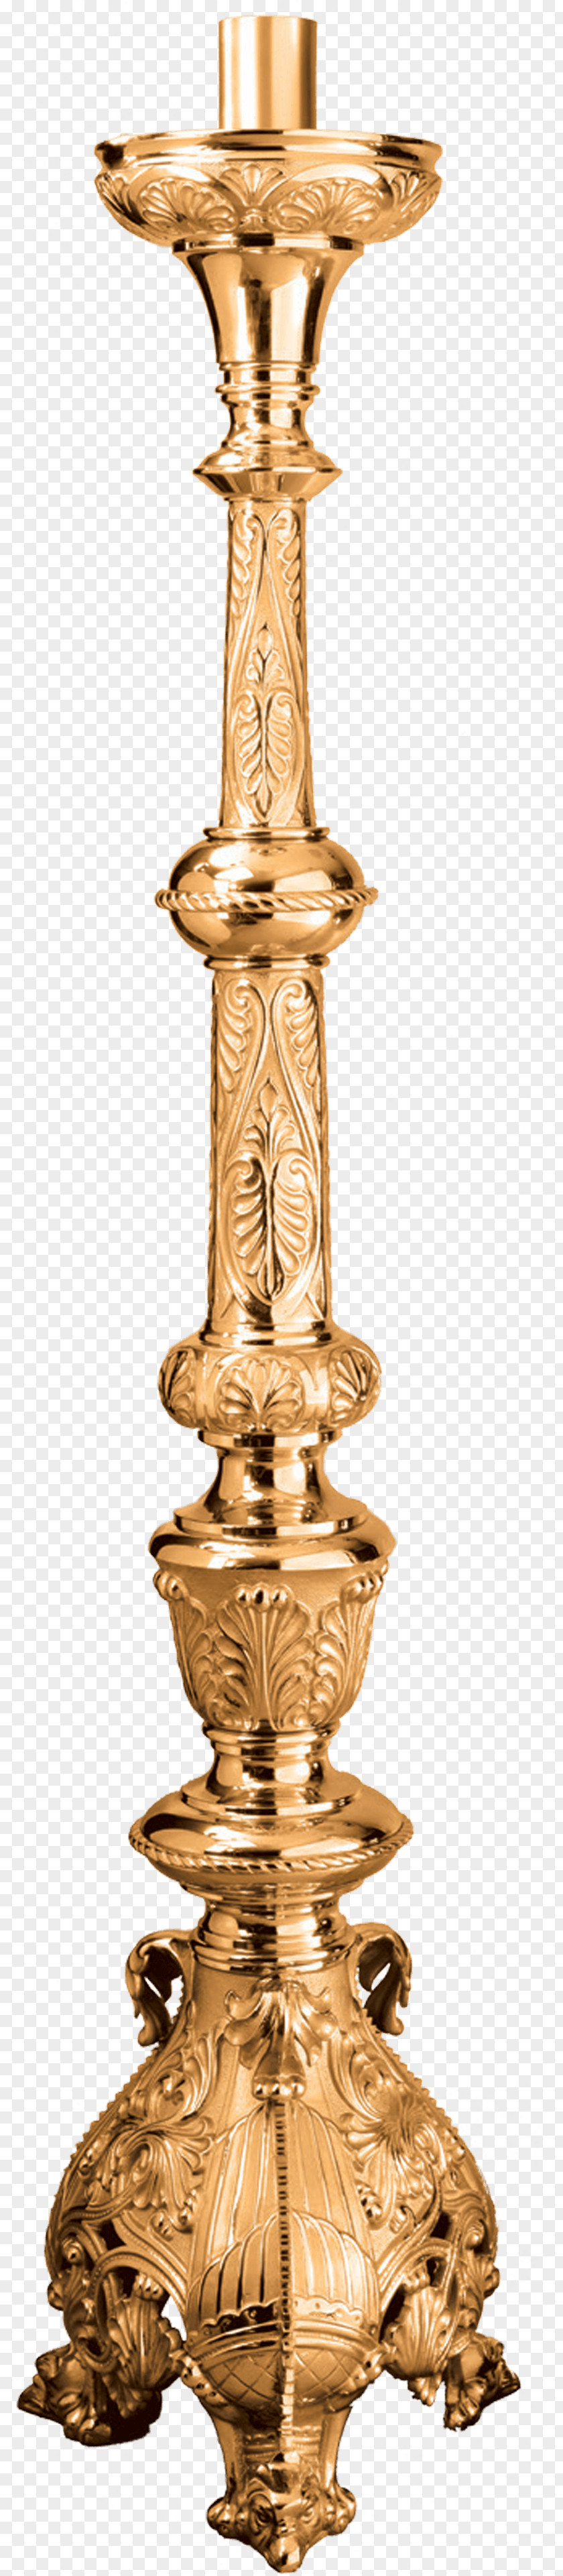 Paschal 01504 Candle PNG